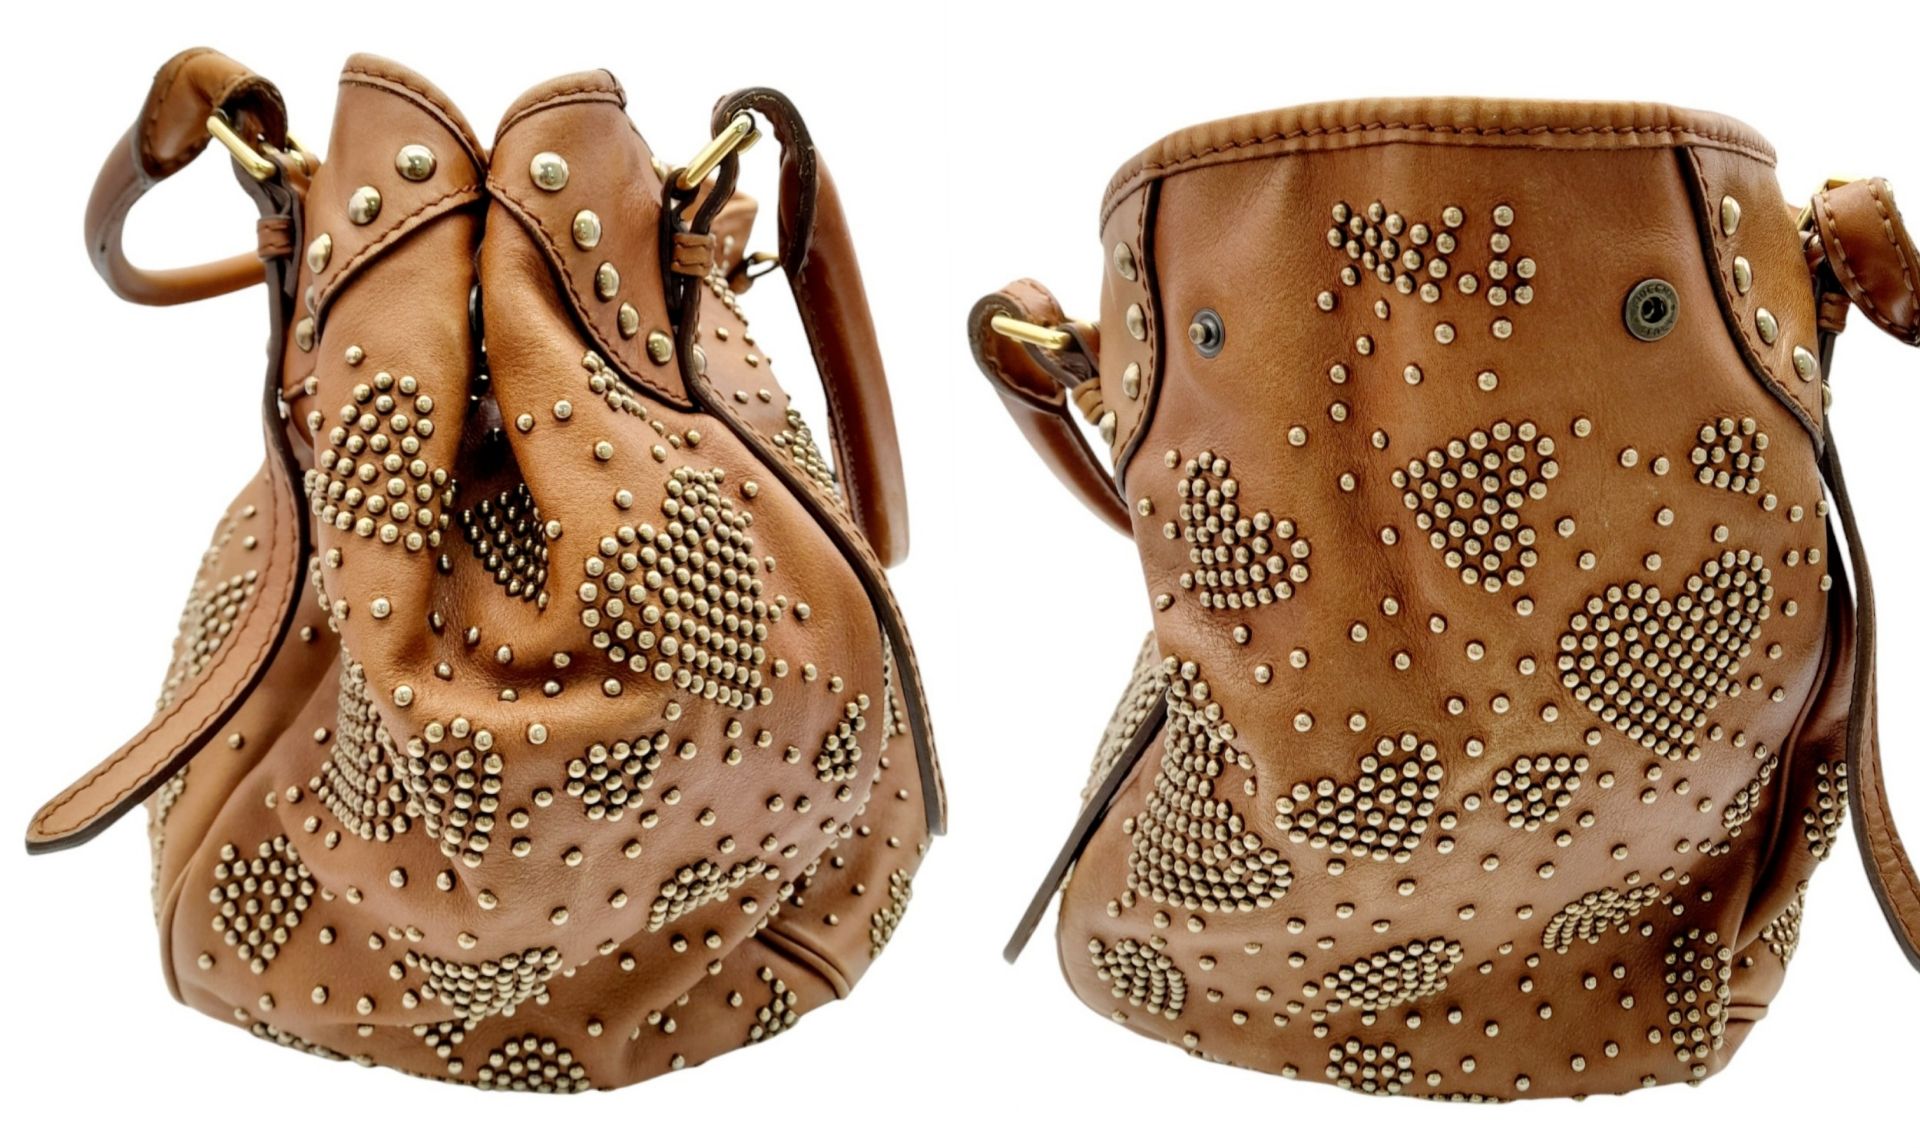 A Burberry Tan Studded Heart Hobo Bag. Leather exterior with stud embellishments, golden-toned - Bild 4 aus 8